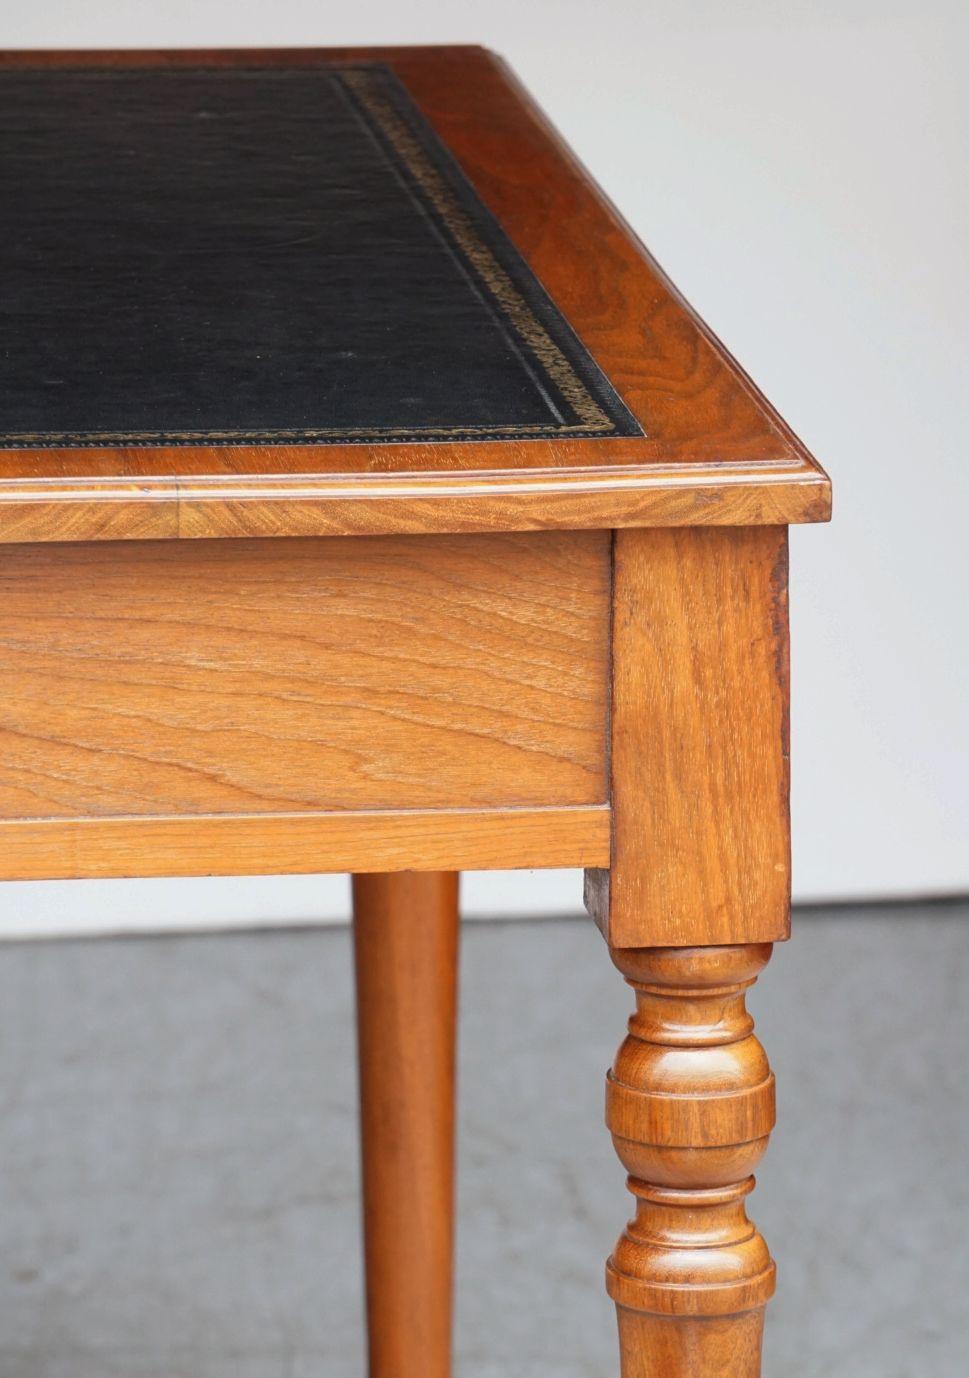 English Writing Desk or Table of Walnut with Embossed Black Leather Top 14